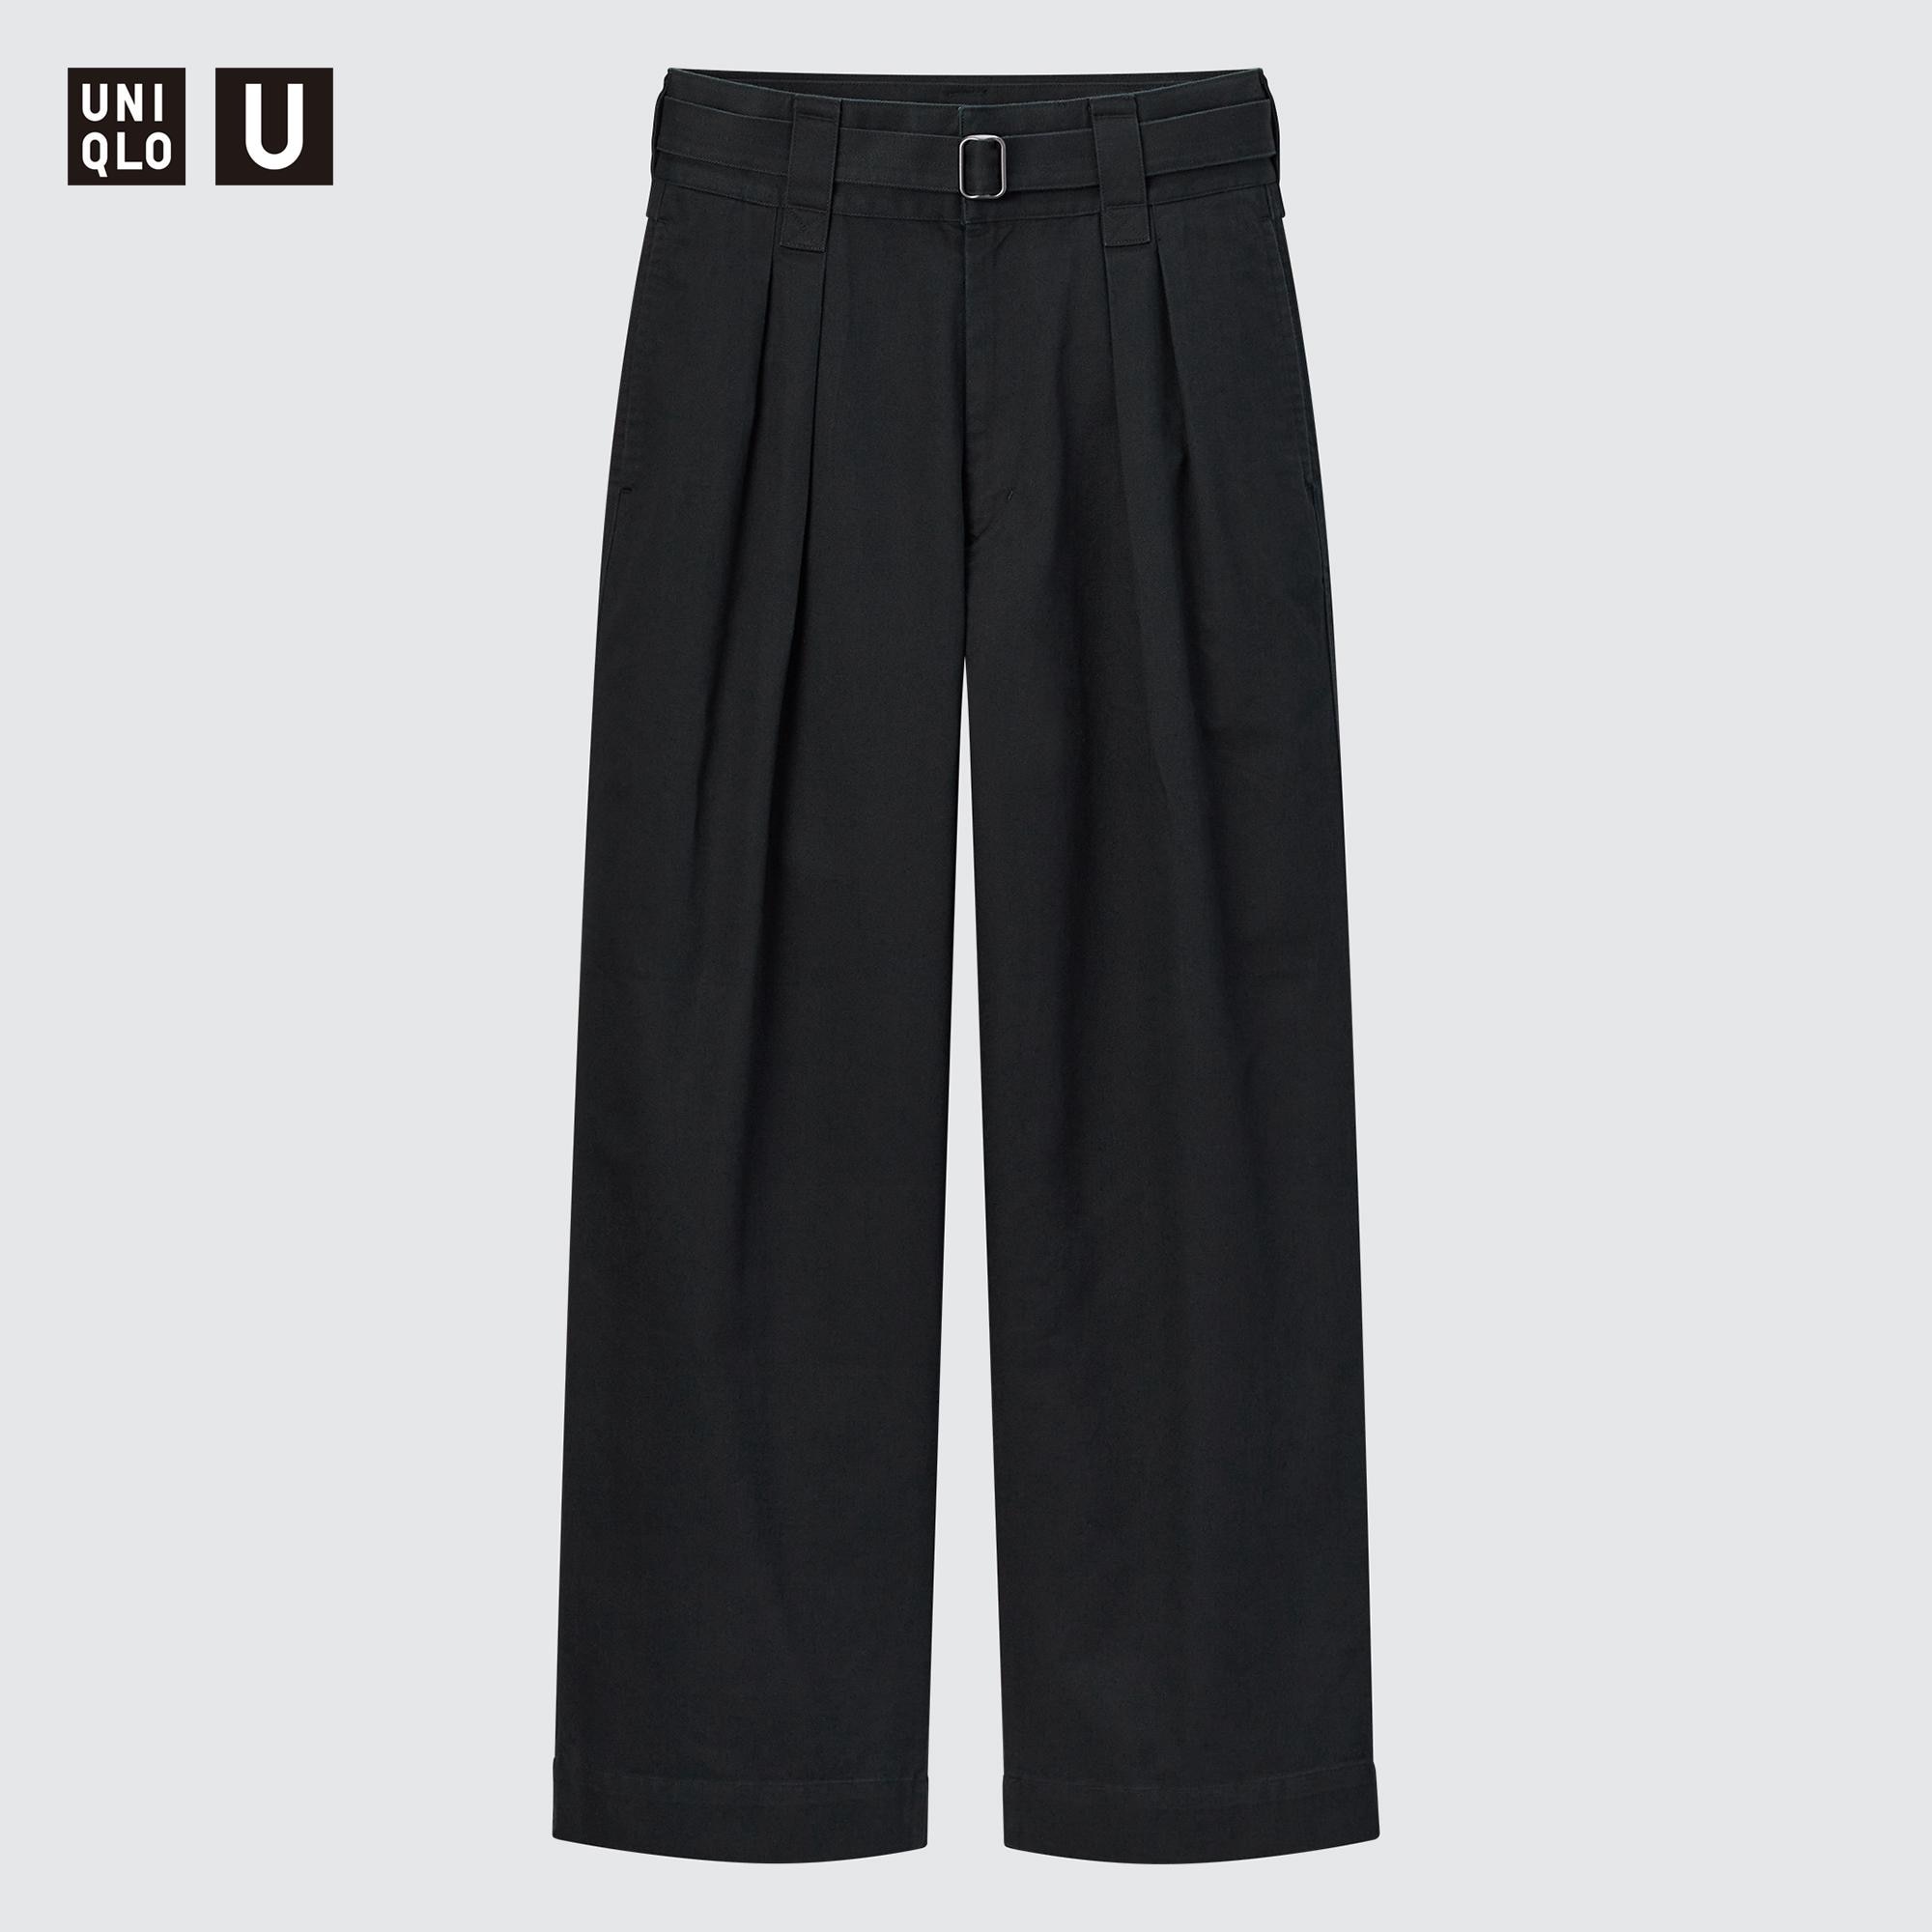 UNIQLO Smart Ankle Pants (2-Way Stretch, Wool-Like,Tall) | StyleHint